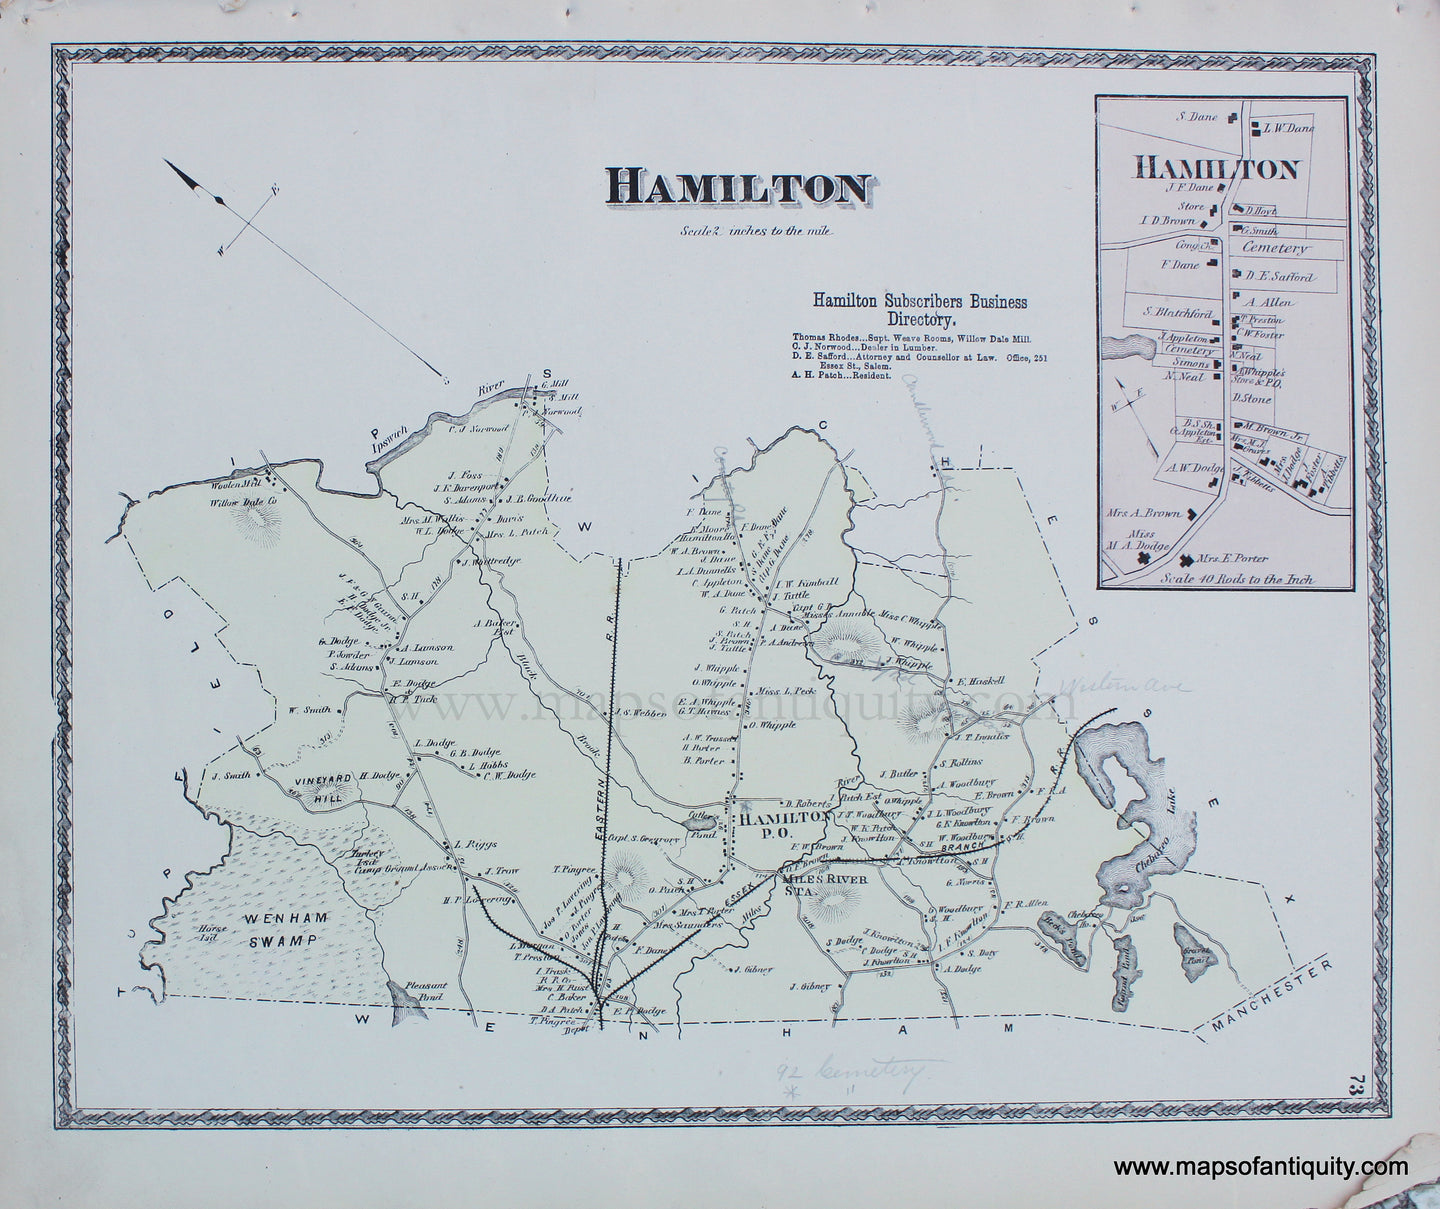 Antique-Hand-Colored-Map-Hamilton-Massachusetts-**********-Essex-County--1872-Beers-Maps-Of-Antiquity